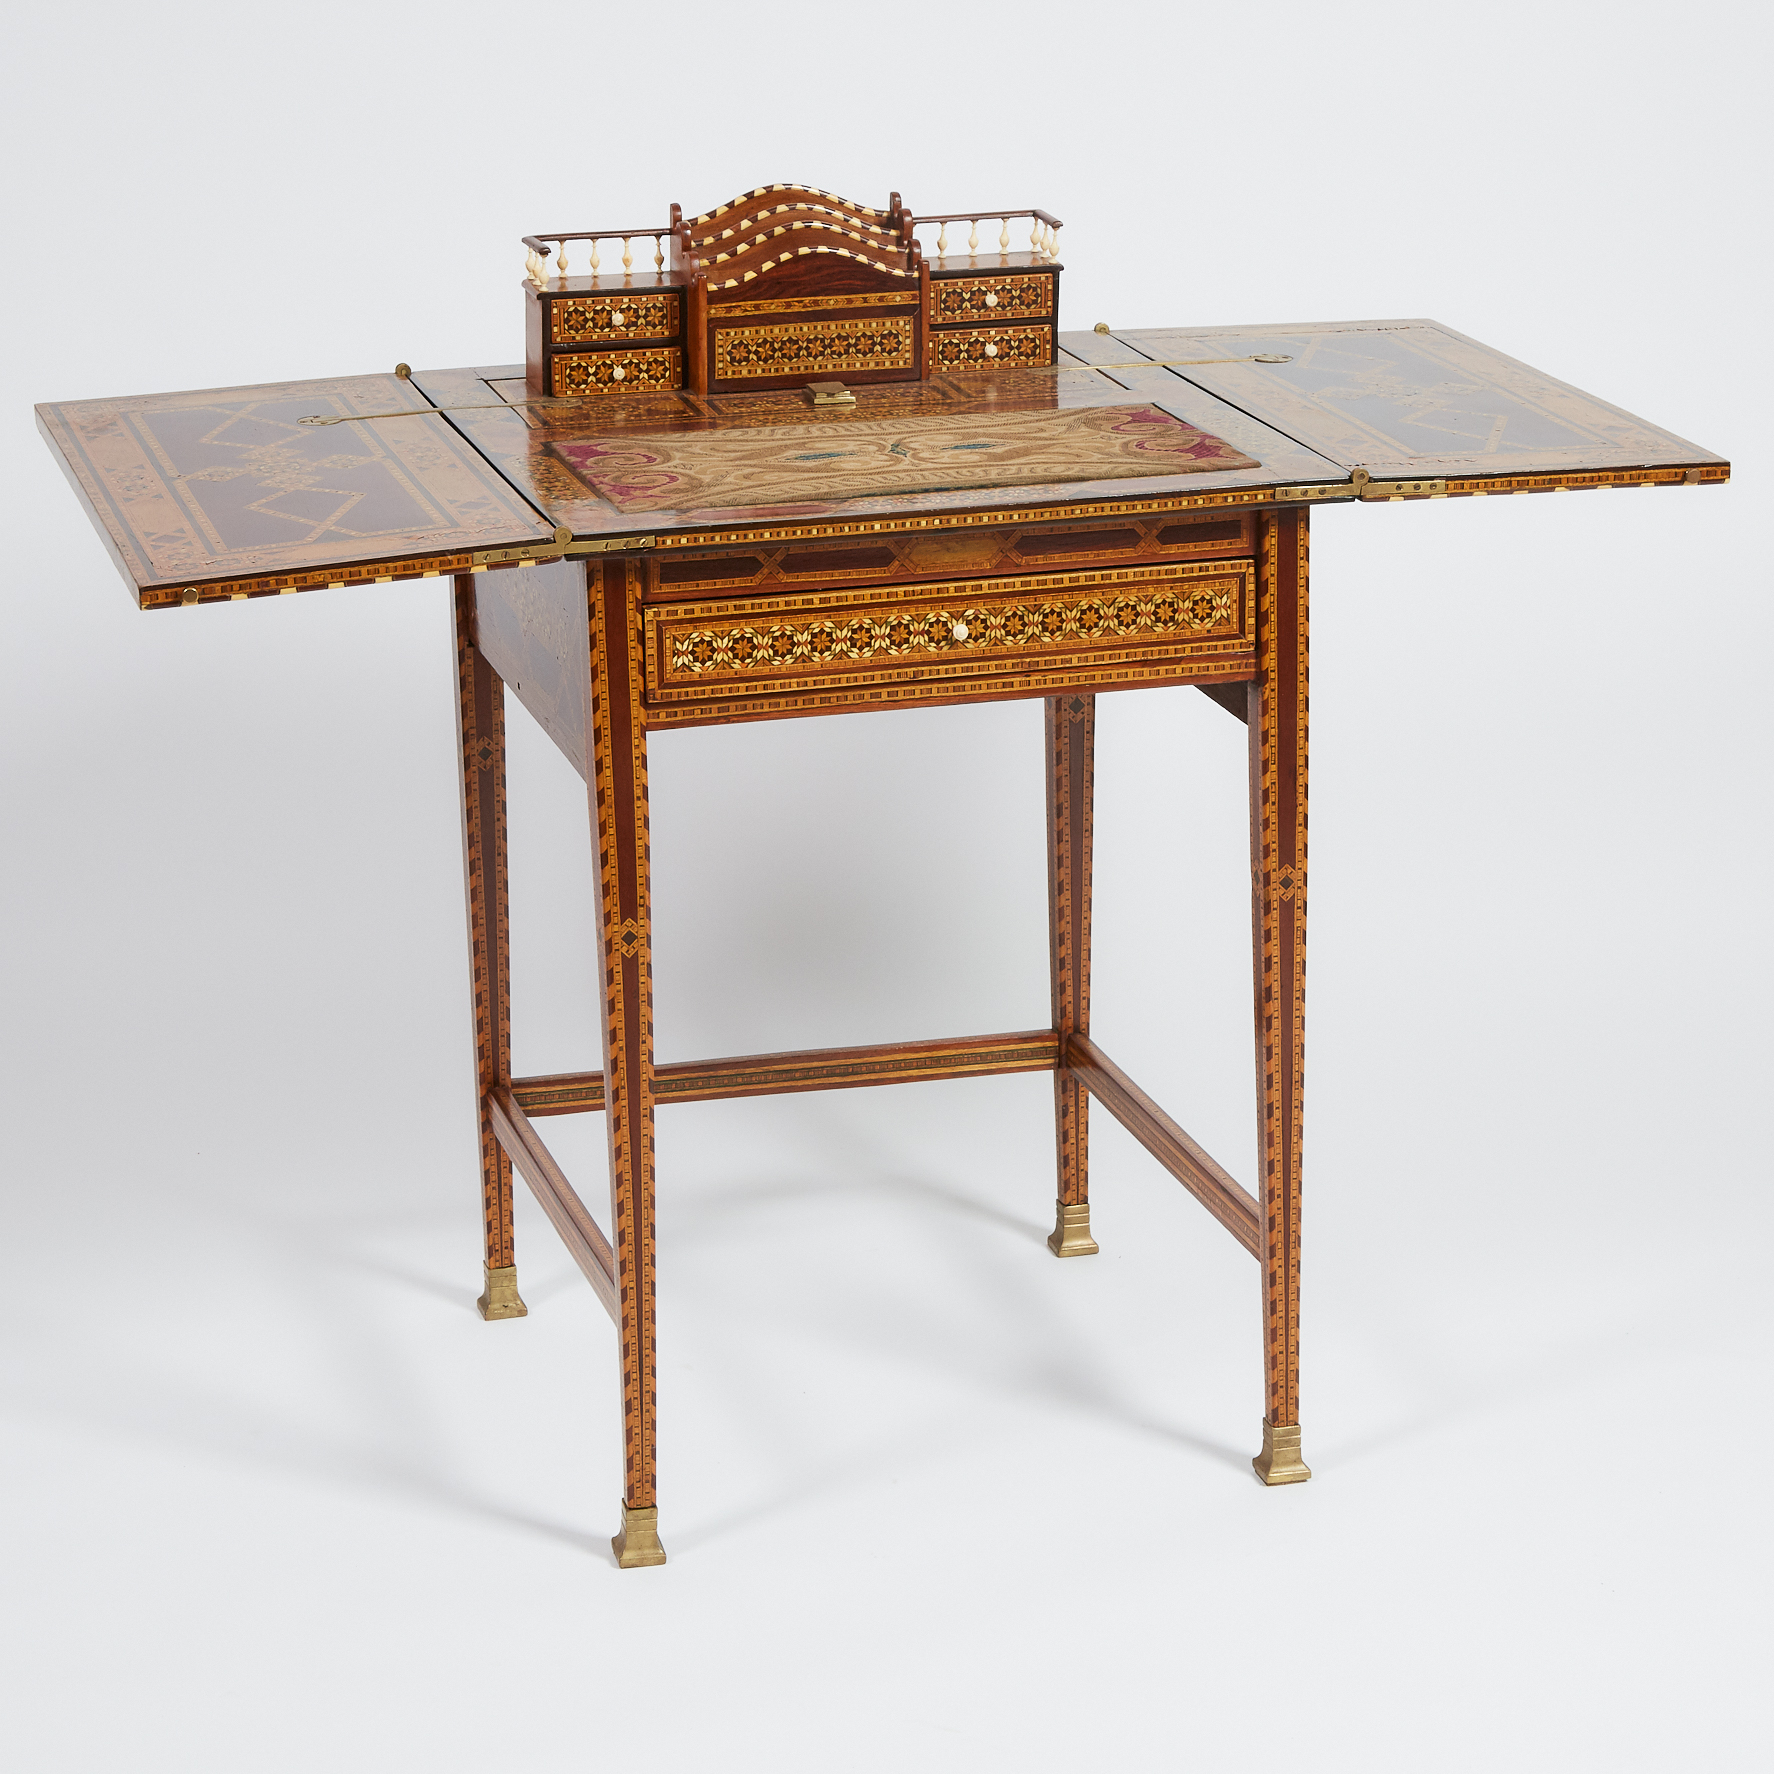 Syrian Bone and Exotic Mixed Wood Parquetry Writing Desk, early 20th century